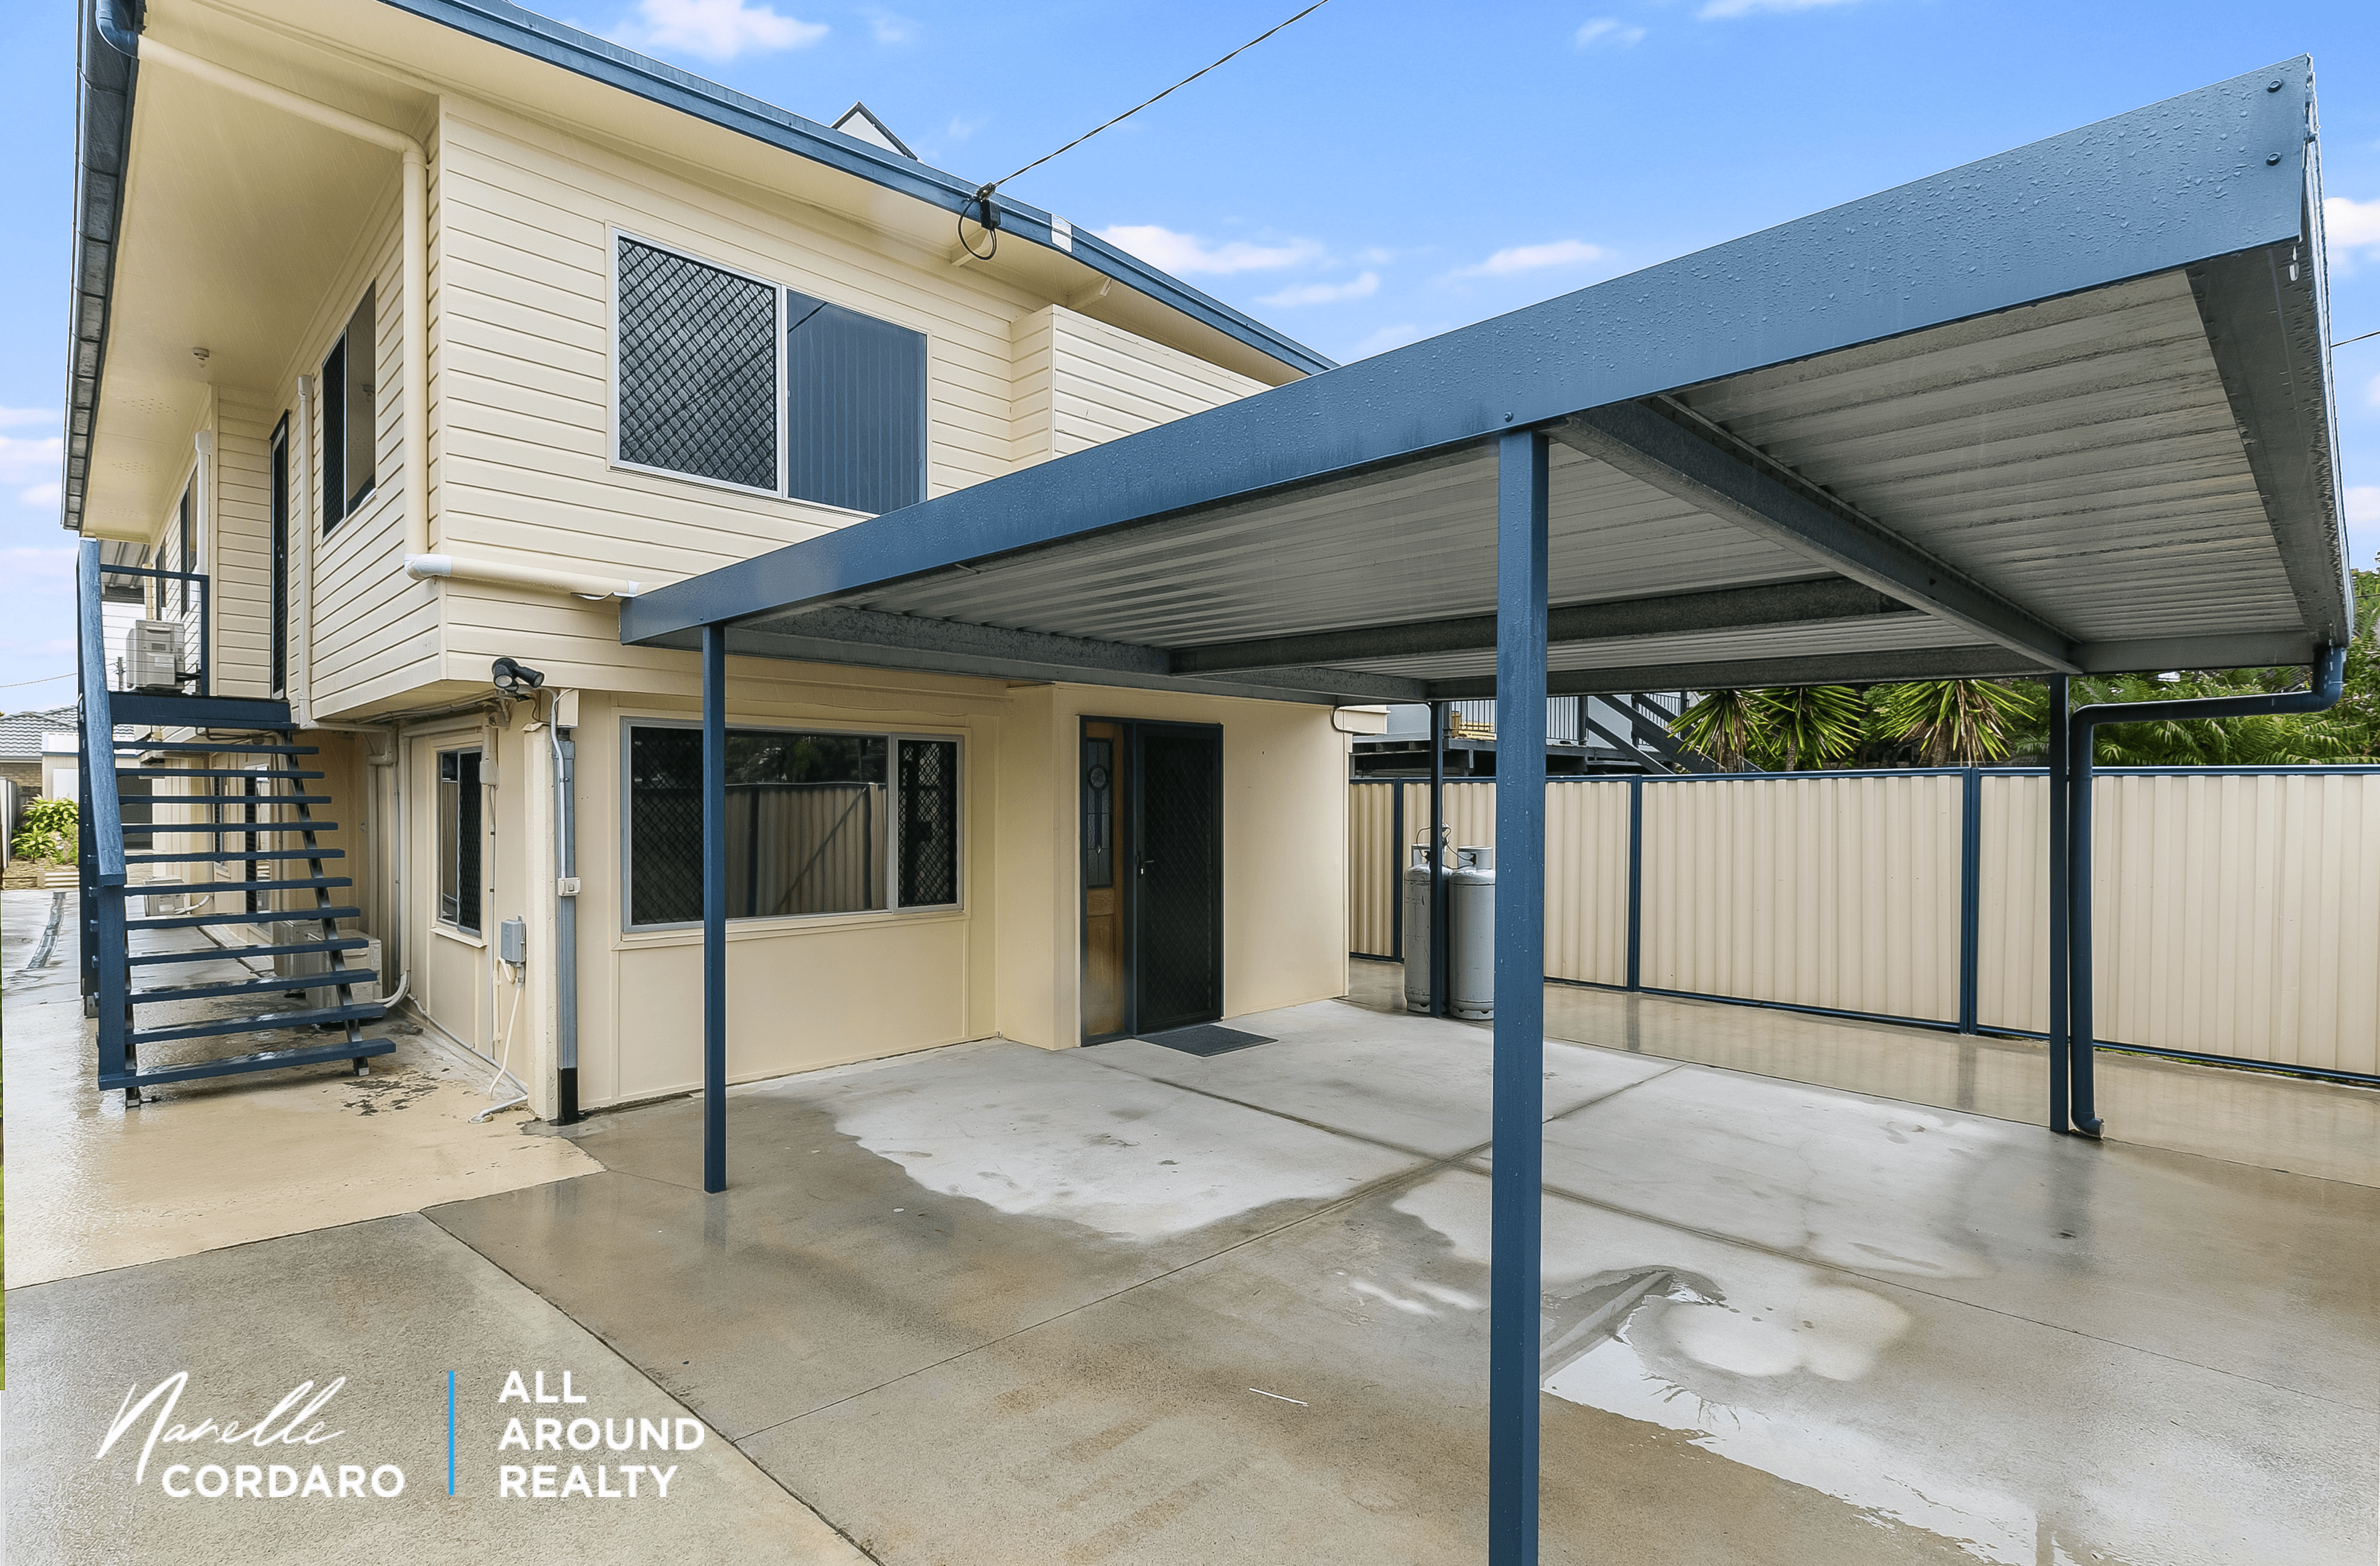 62 Moon St, Caboolture South, QLD 4510